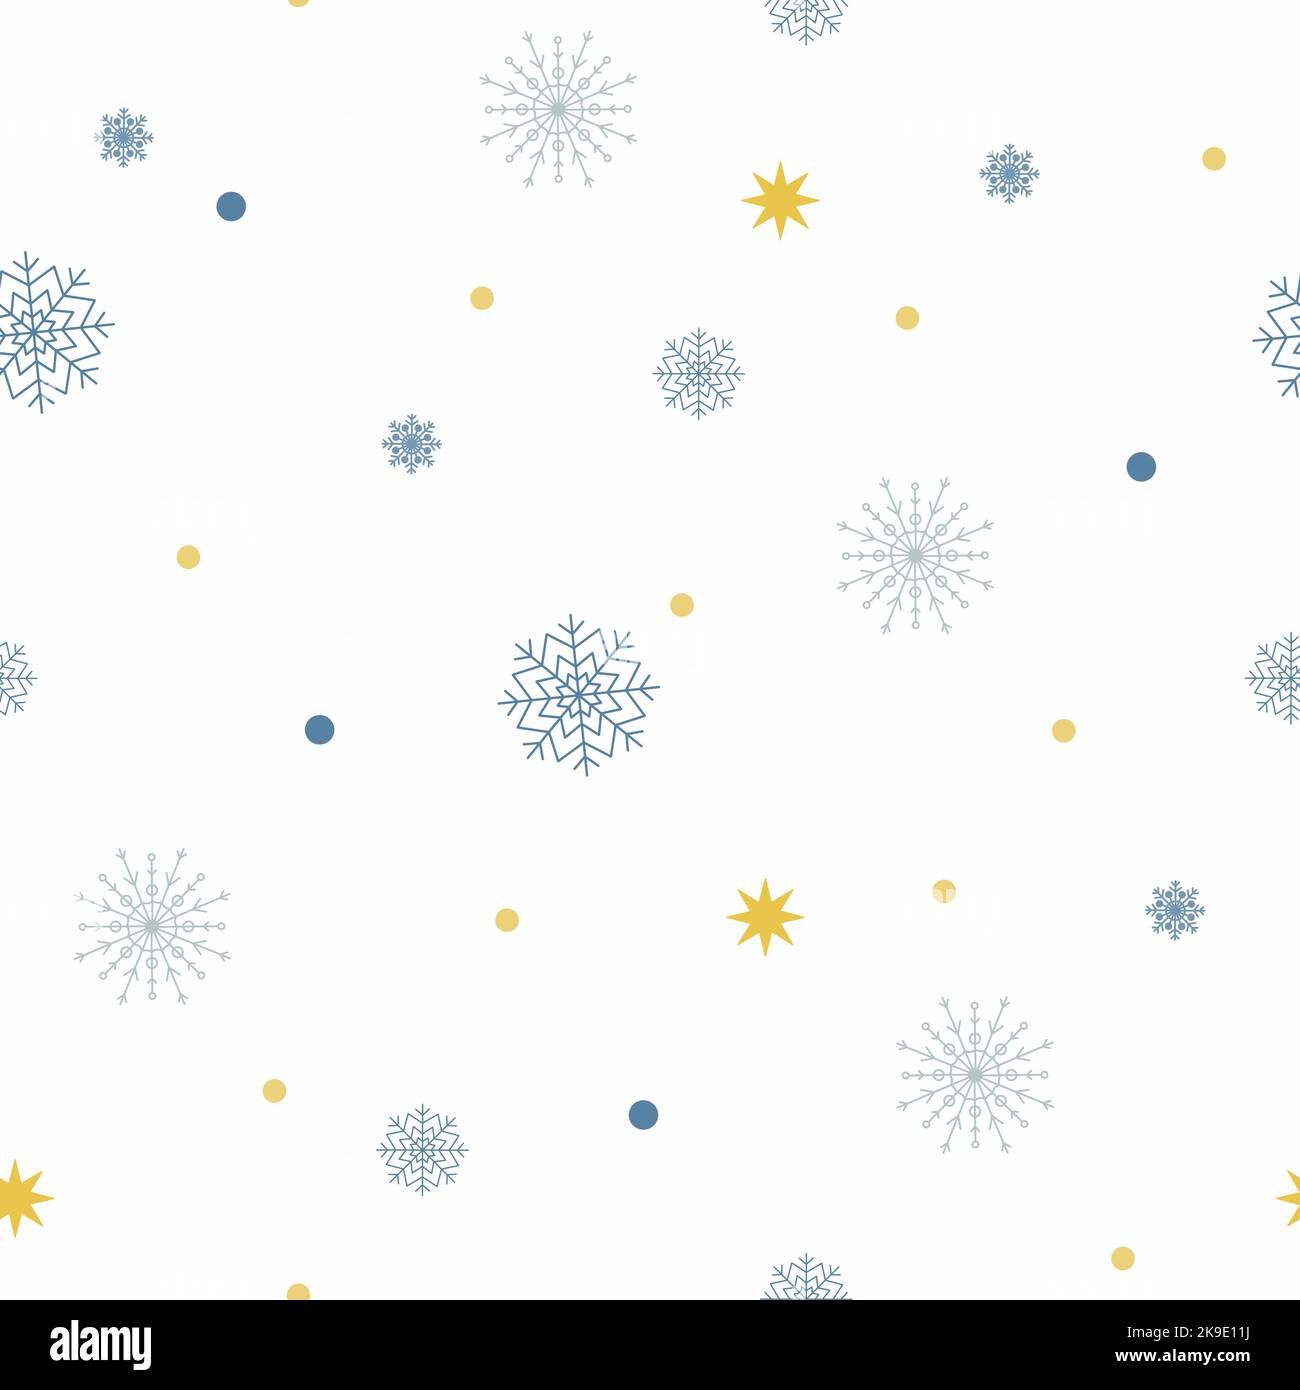 Raster xmas seamless pattern with snowflakes and glitter. Holy Jolly Christmas. Set of snowflakes and gold star, sparkles on white background. Stock Photo